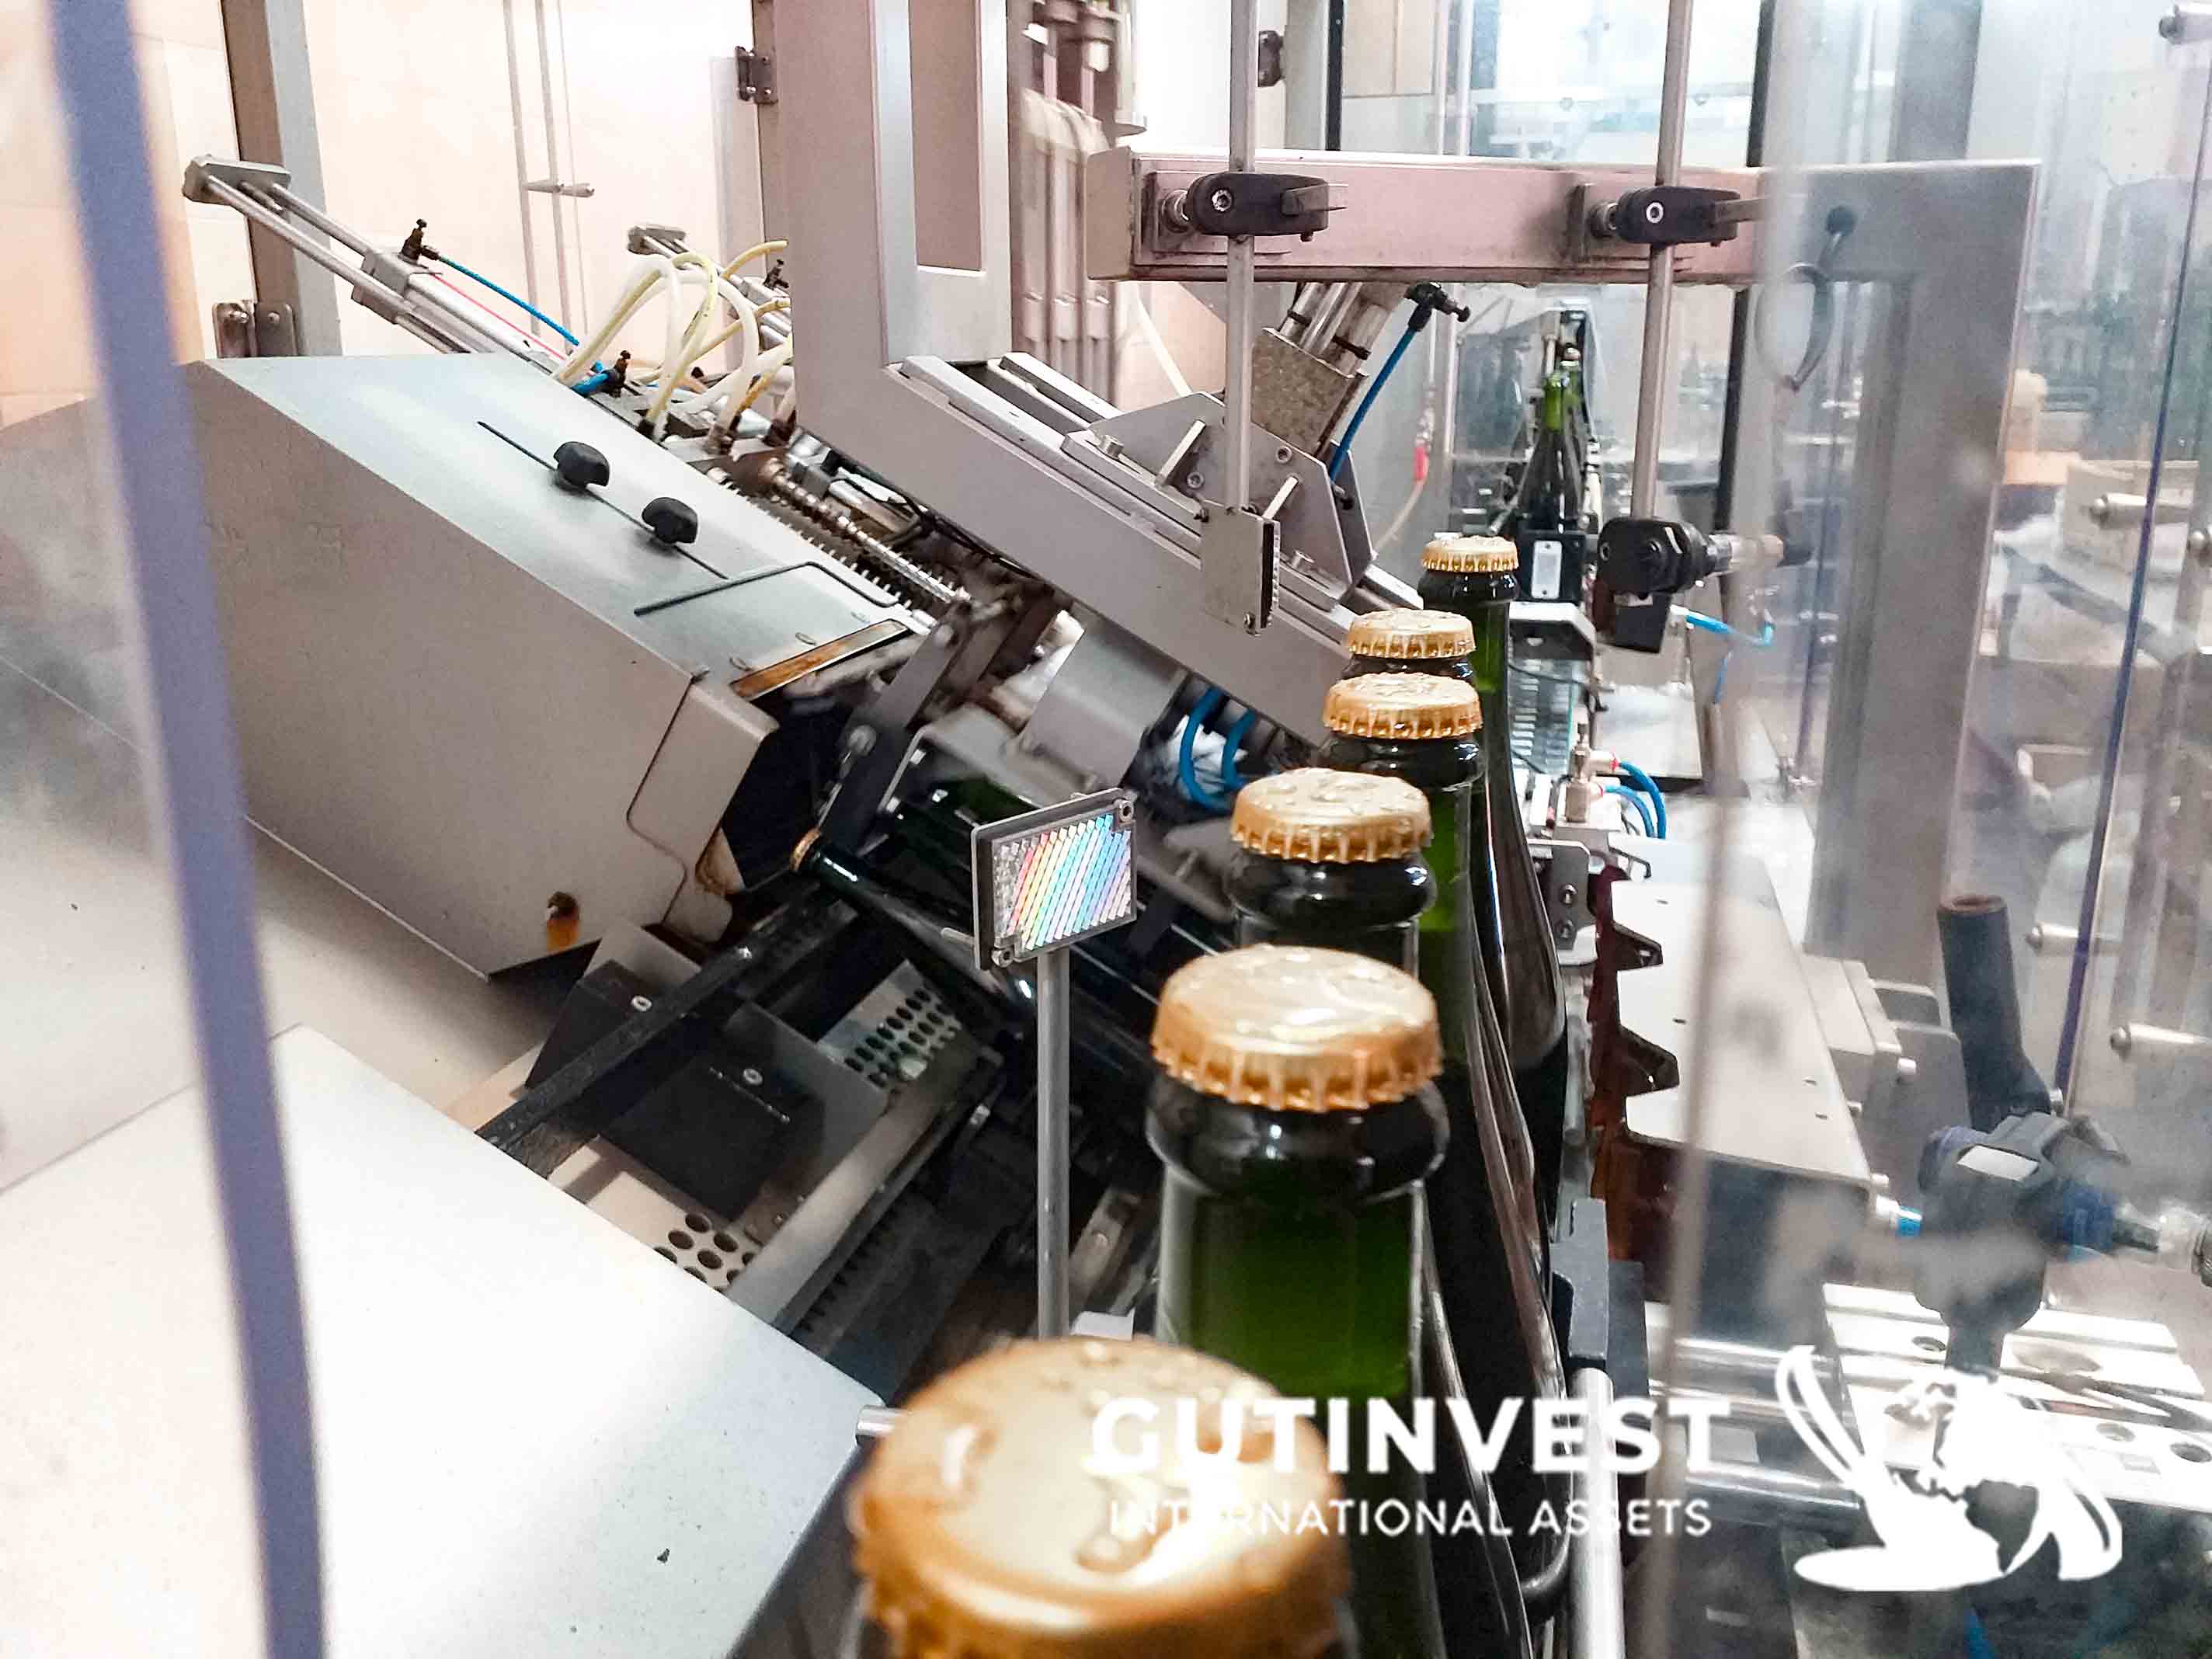 Automatic disgorgement and dosing machine for sparkling win